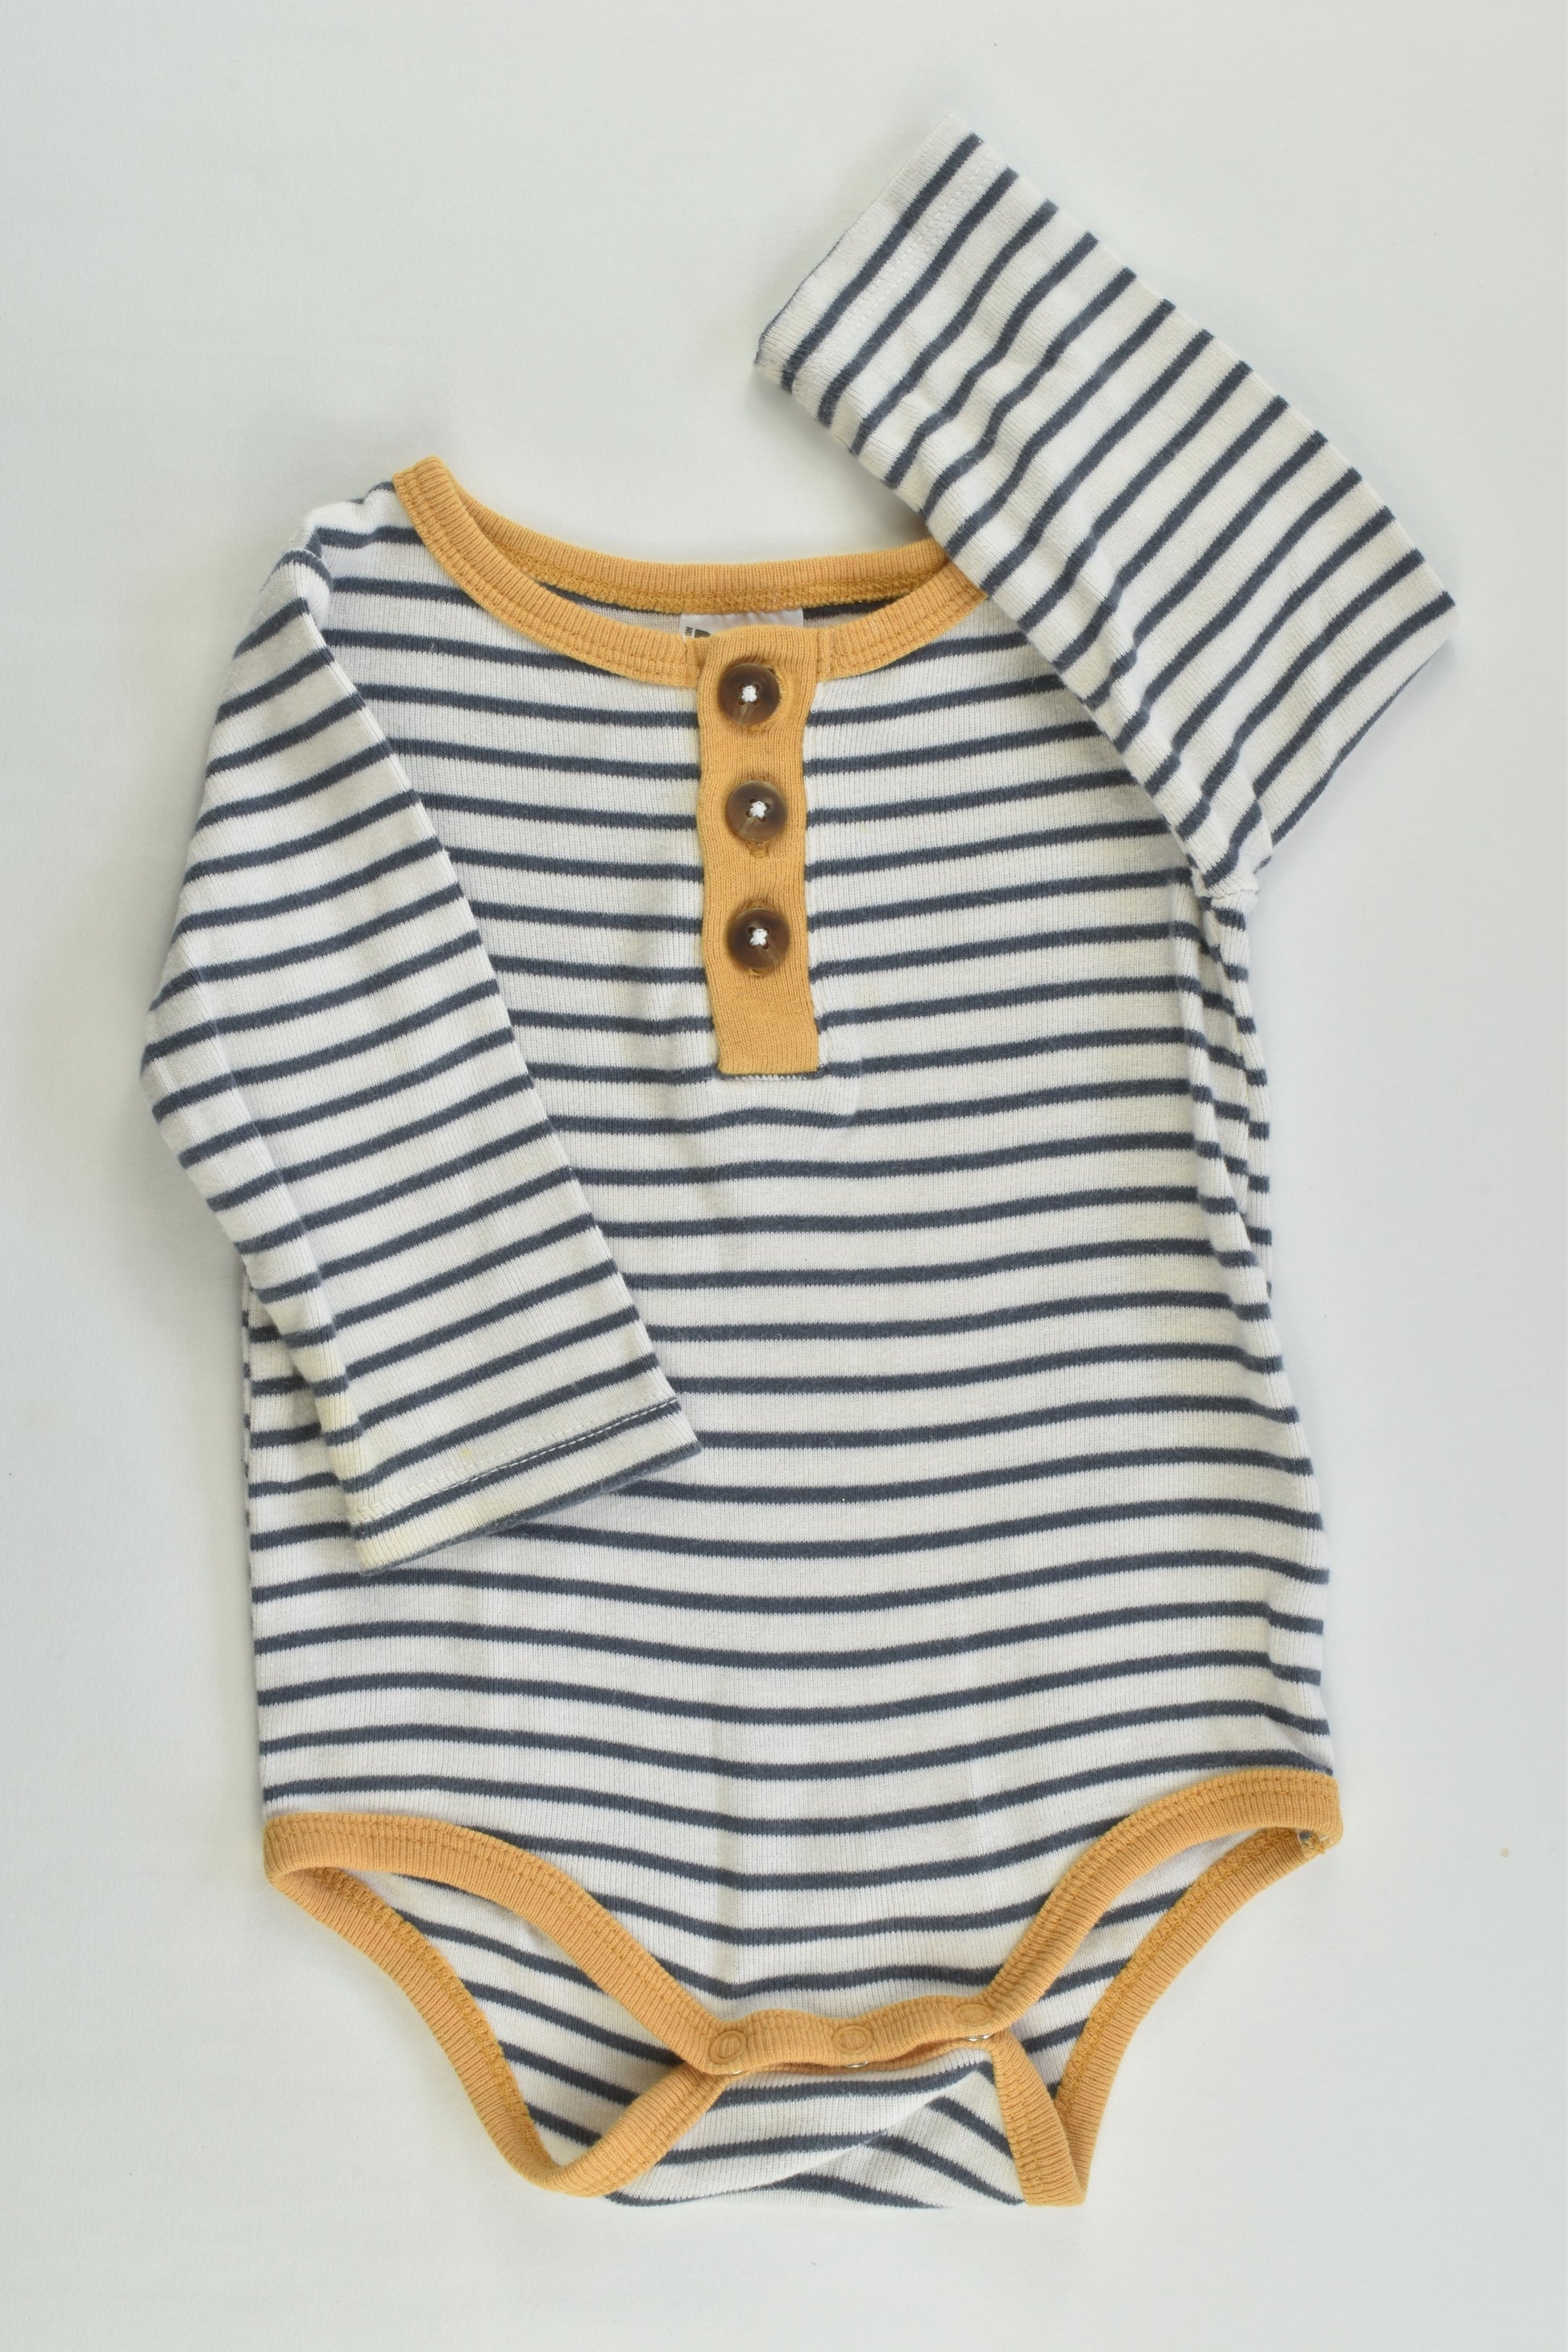 Cotton On Baby Size 00 (3-6 months) Striped Bodysuit